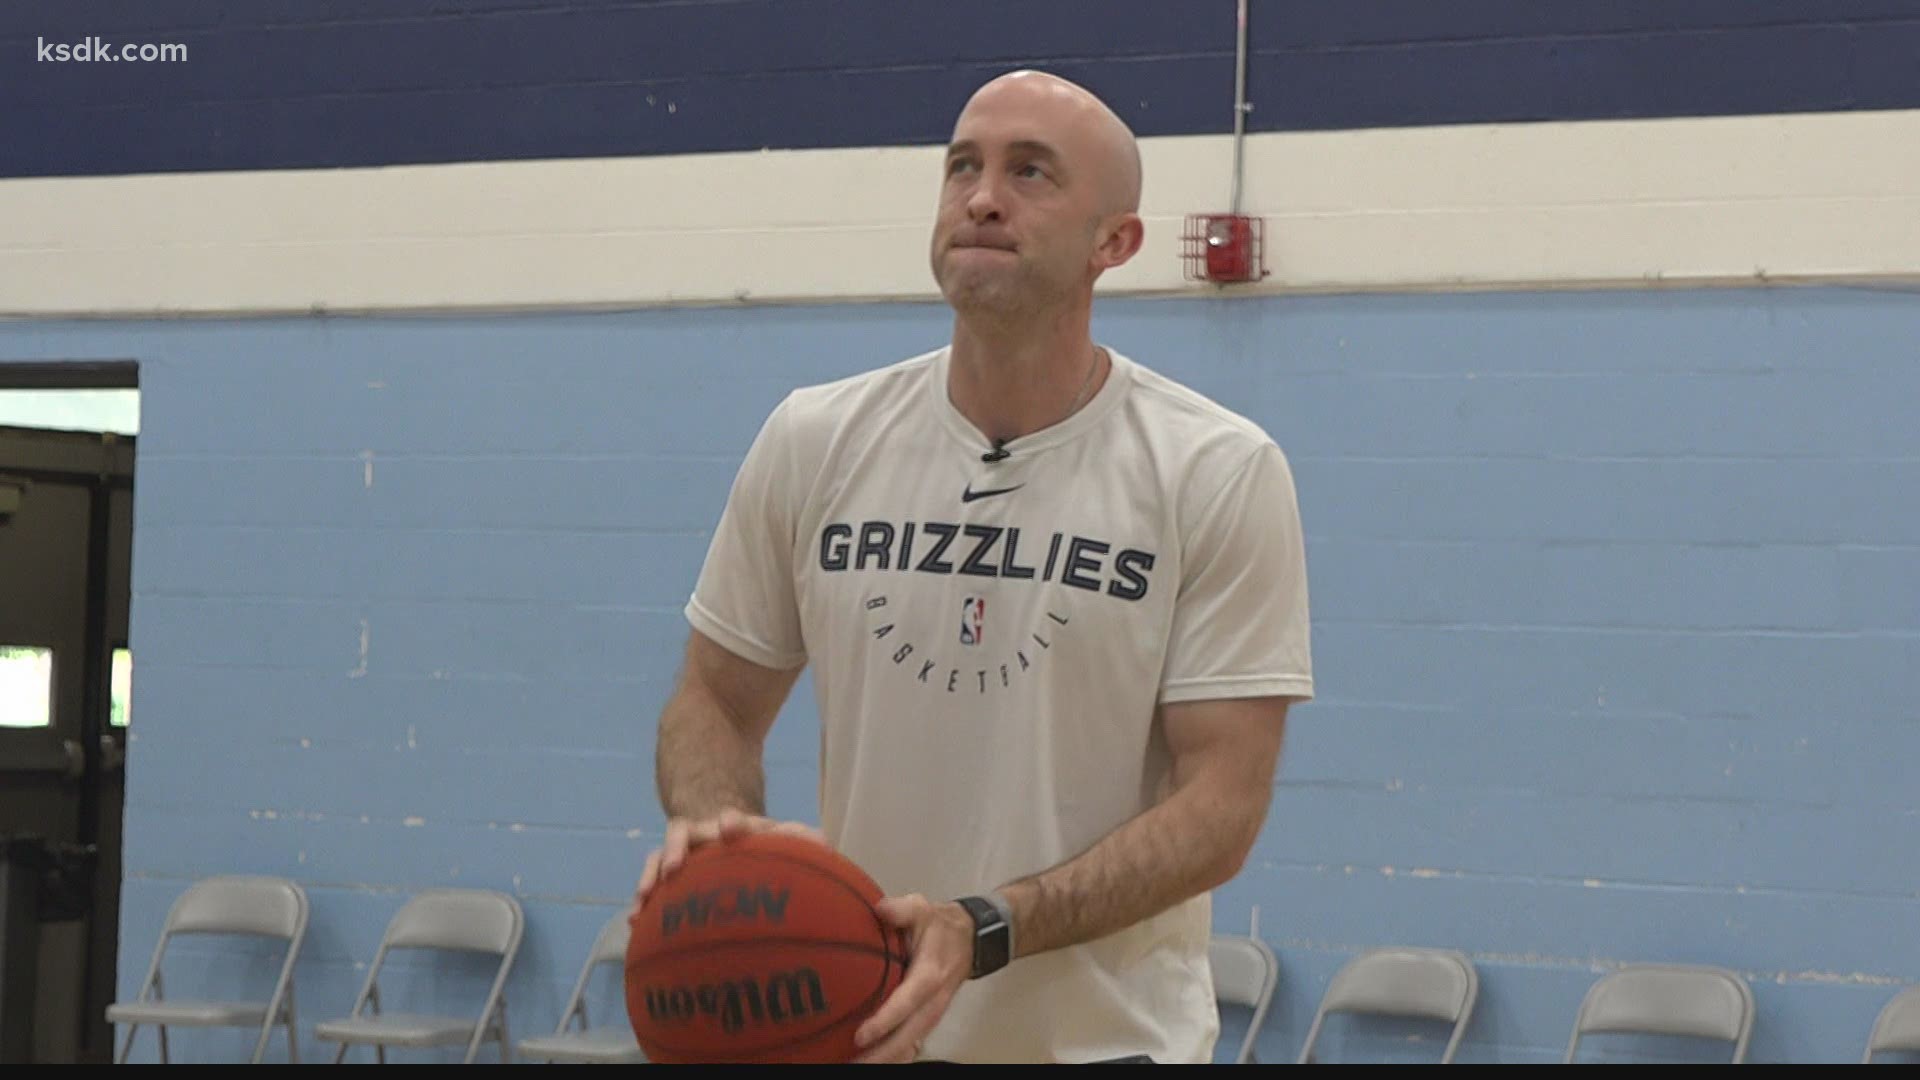 Ahearn is a rising star in the NBA coaching ranks. Frank Cusumano caught up with him to talk about basketball, St. Louis and his career.